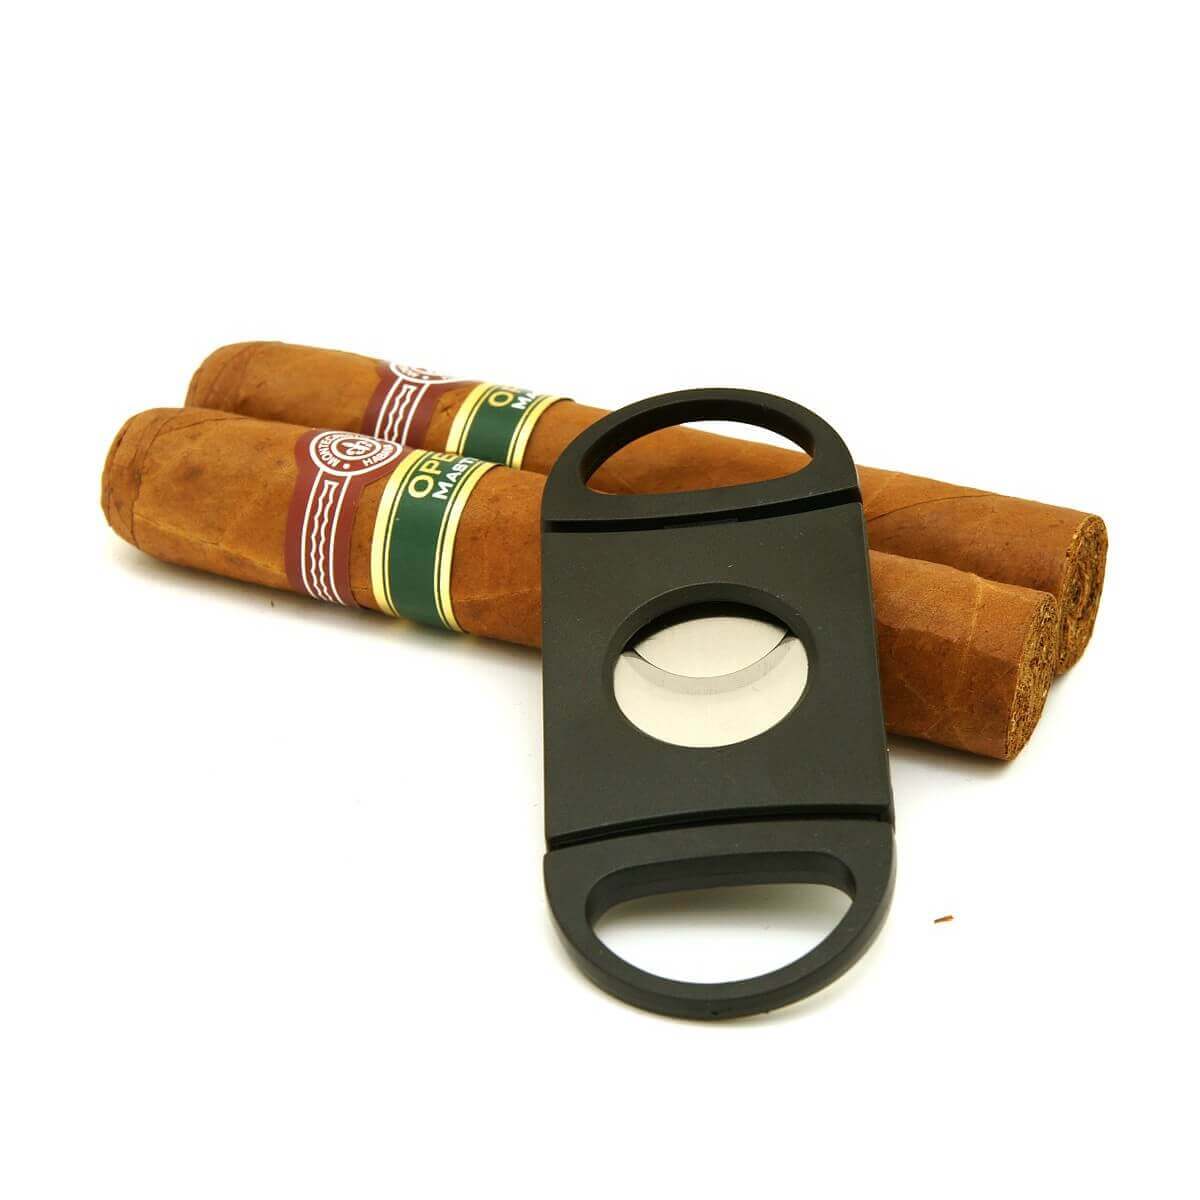 How to choose a good cigar for yourself!